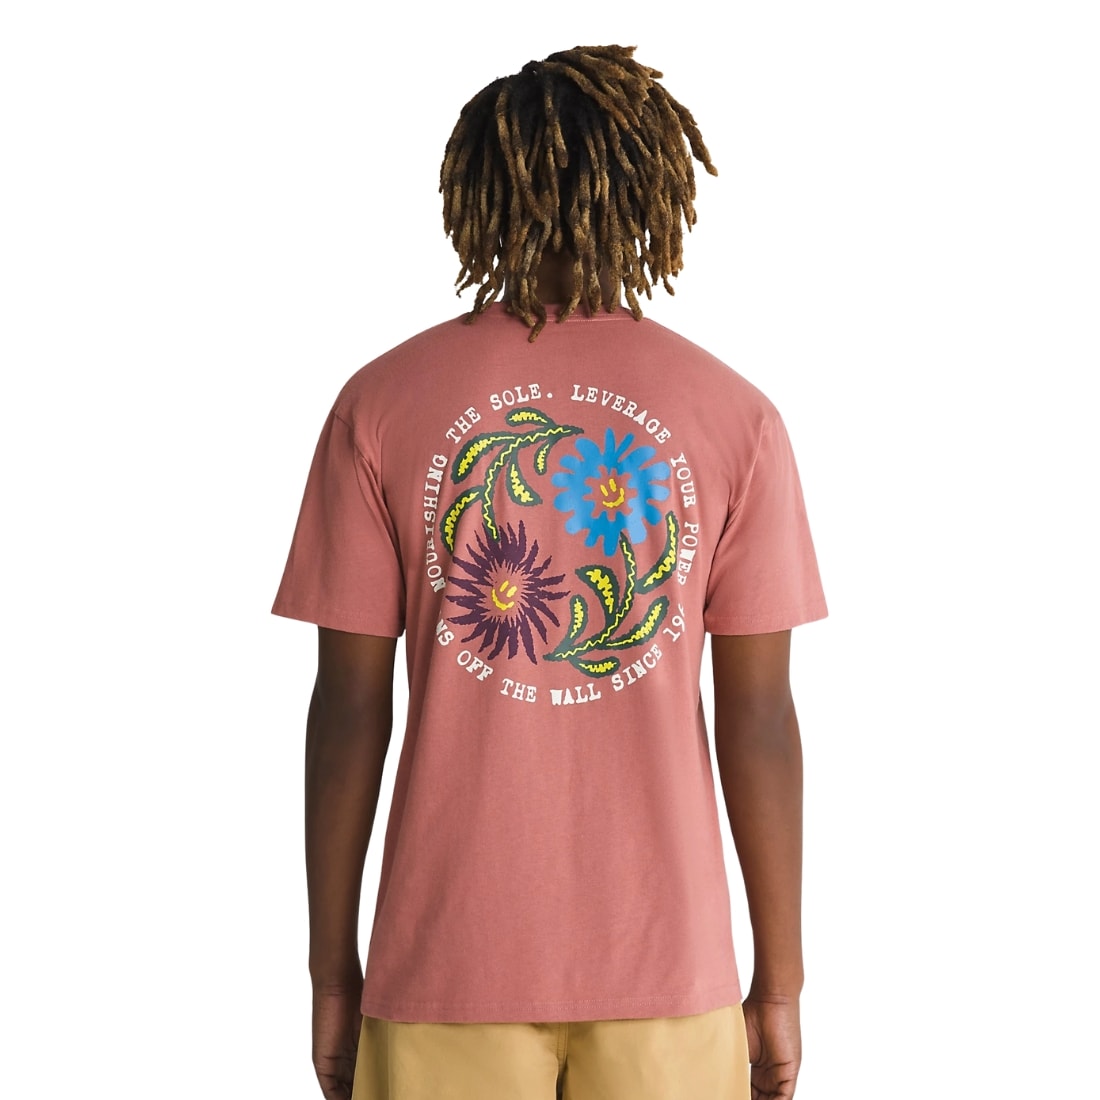 Vans Dual Bloom T-Shirt - Withered Rose - Mens Graphic T-Shirt by Vans